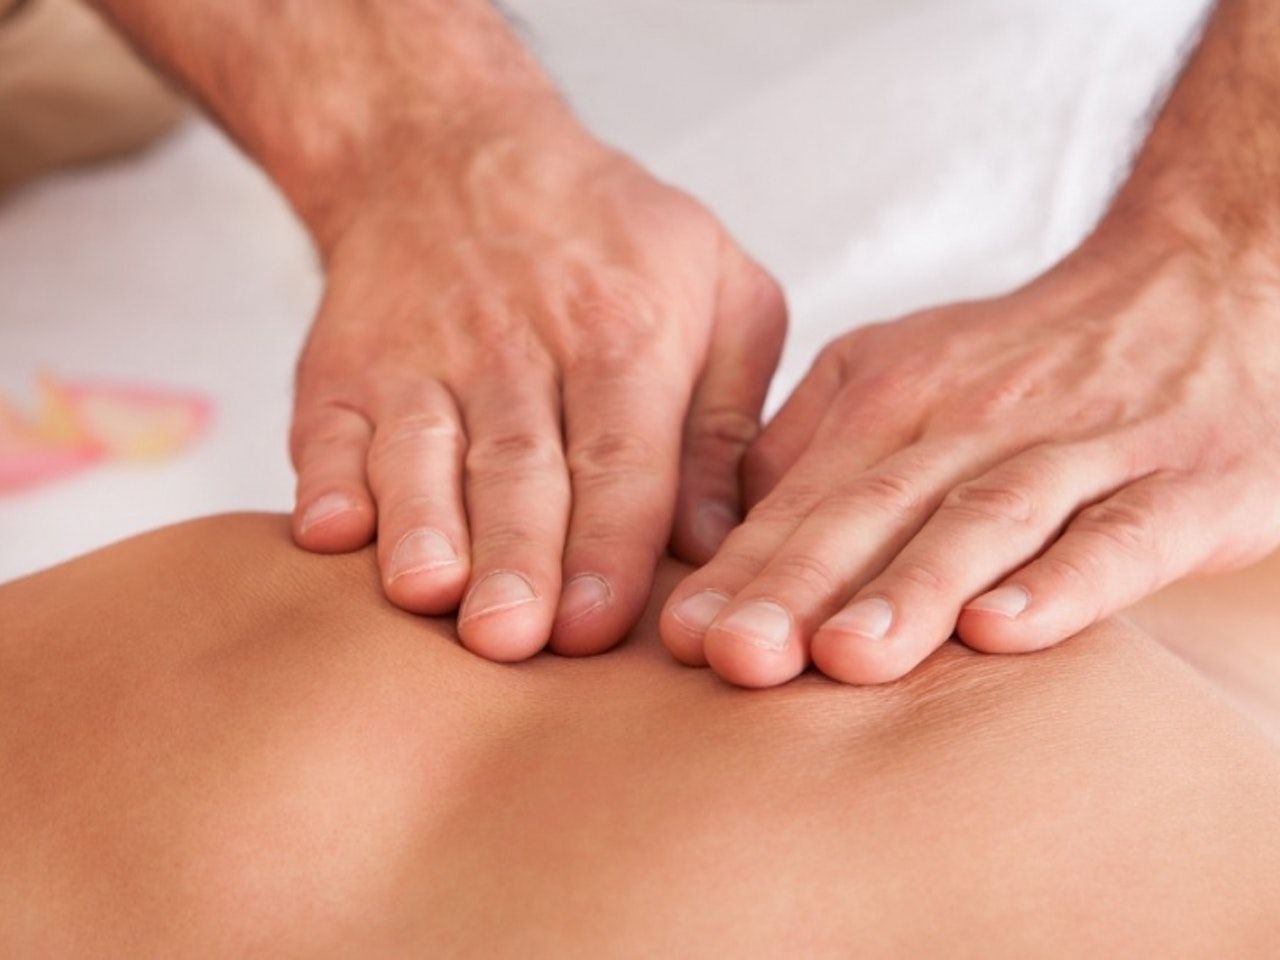 What are the benefits of getting massage for your full body?